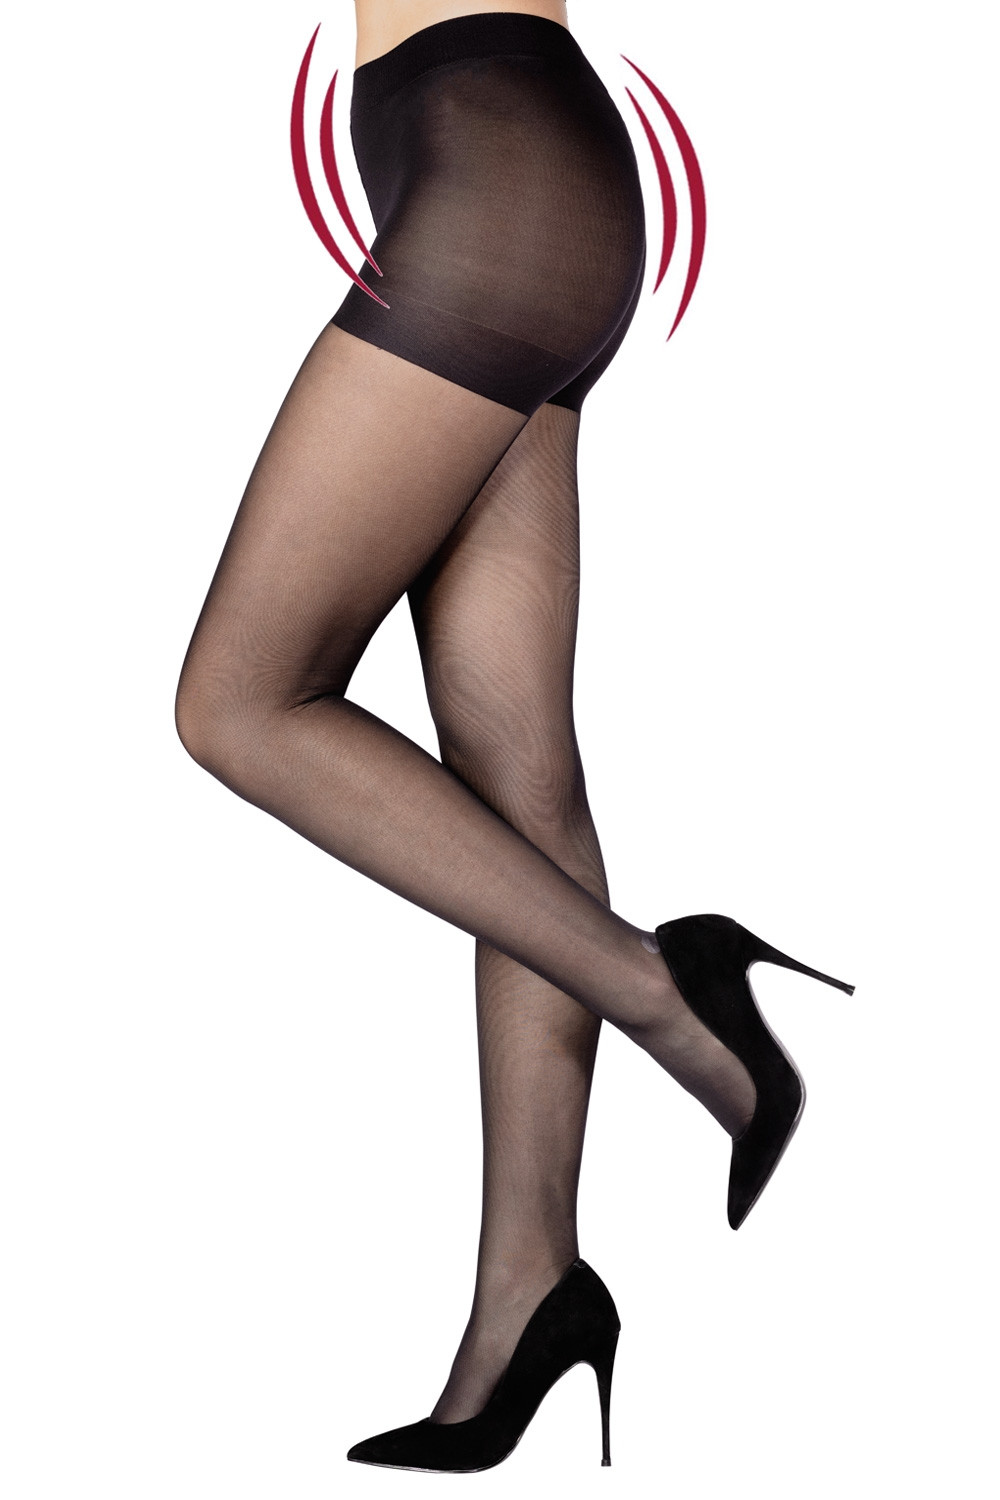 Emilio Cavallini Kiss and Tell Lace Tights-S/M-$30 MSRP - RR Trailers